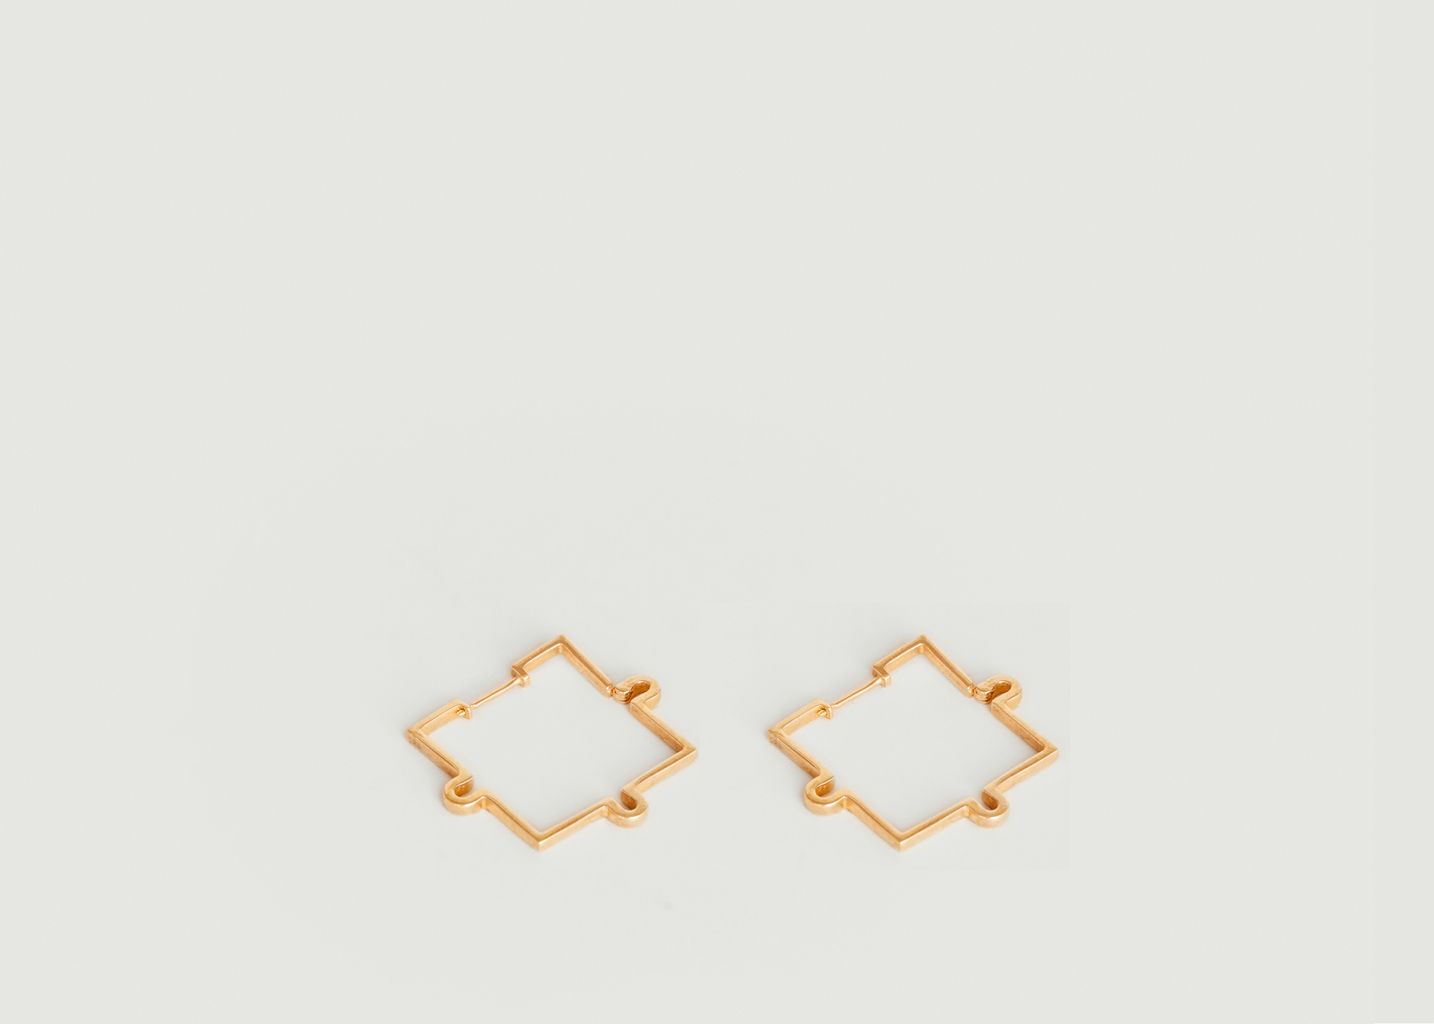 Puzzle dangling earrings - Gamme Blanche